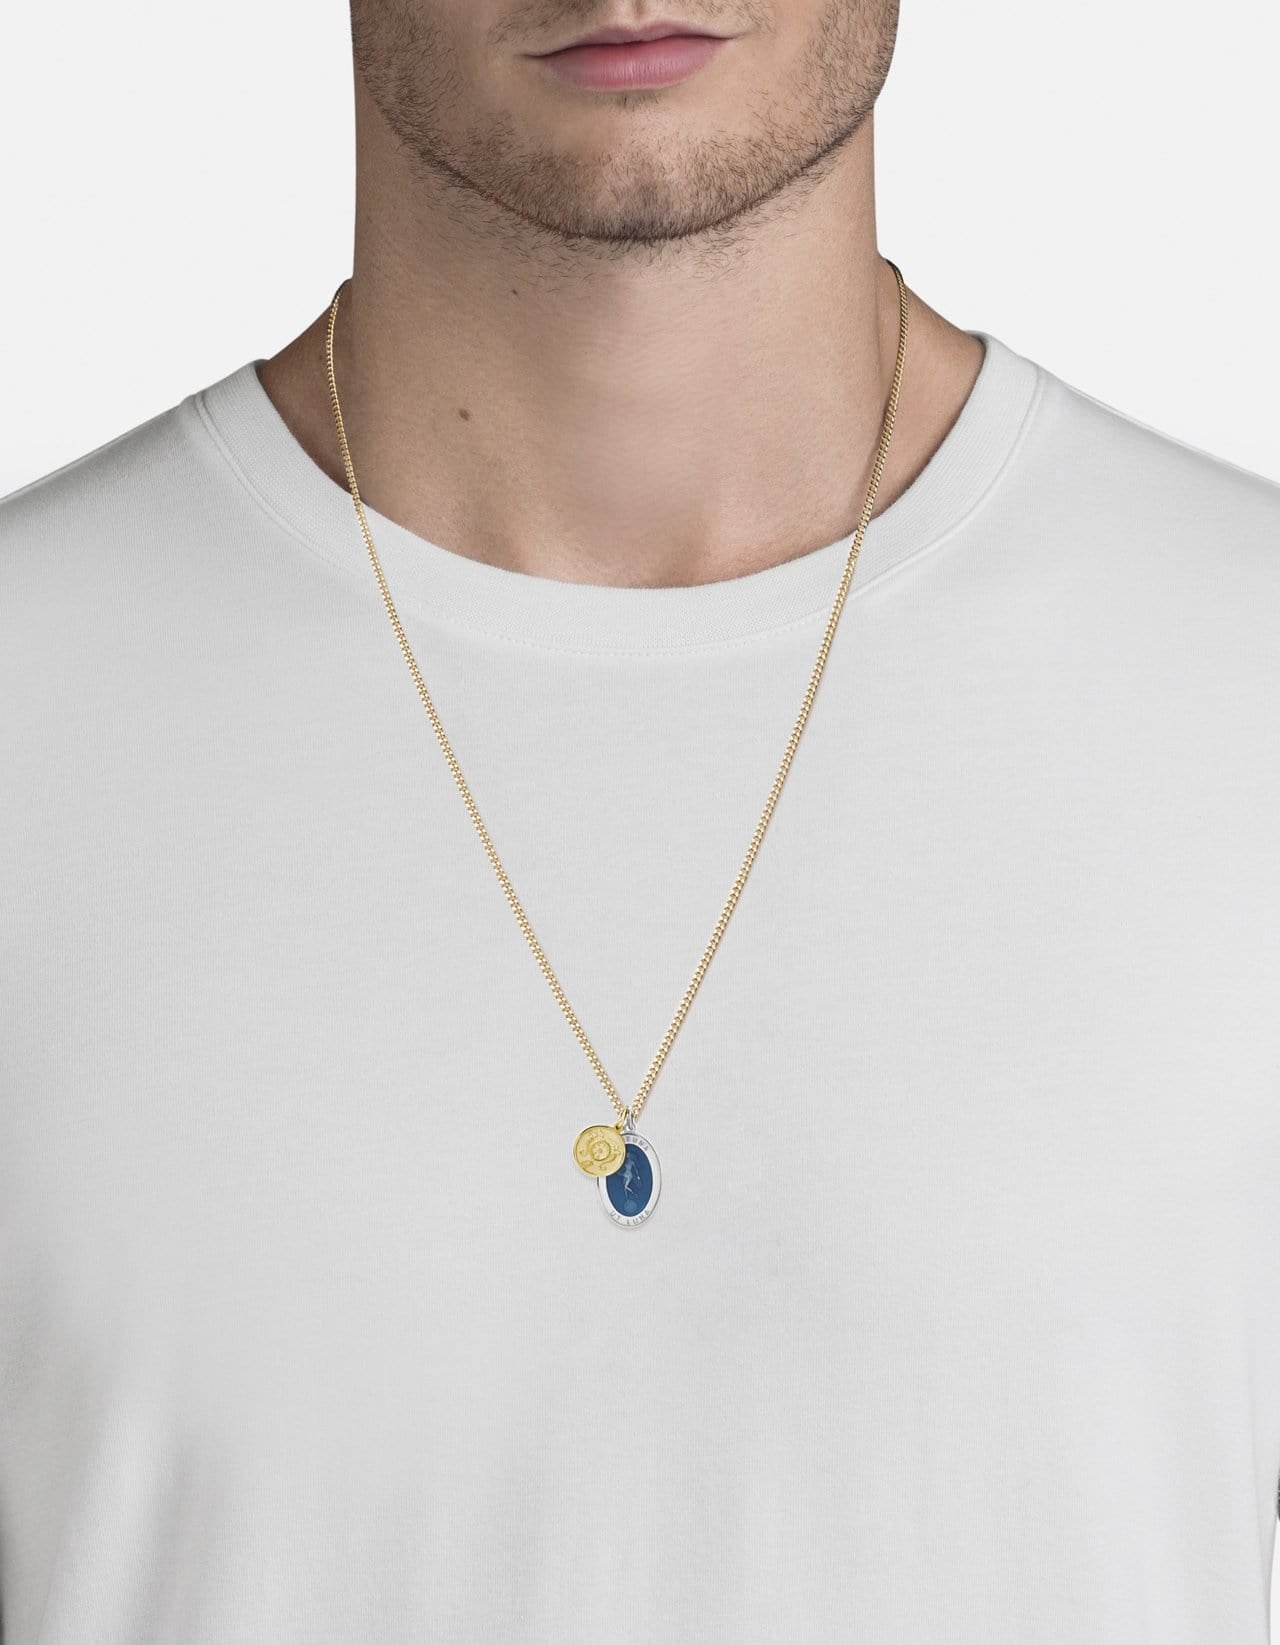 Deluxe 925 Sterling Silver Shema Yisrael Men's Necklace With Blue Seashell  (Thick Pendant), Jewelry | Judaica Webstore